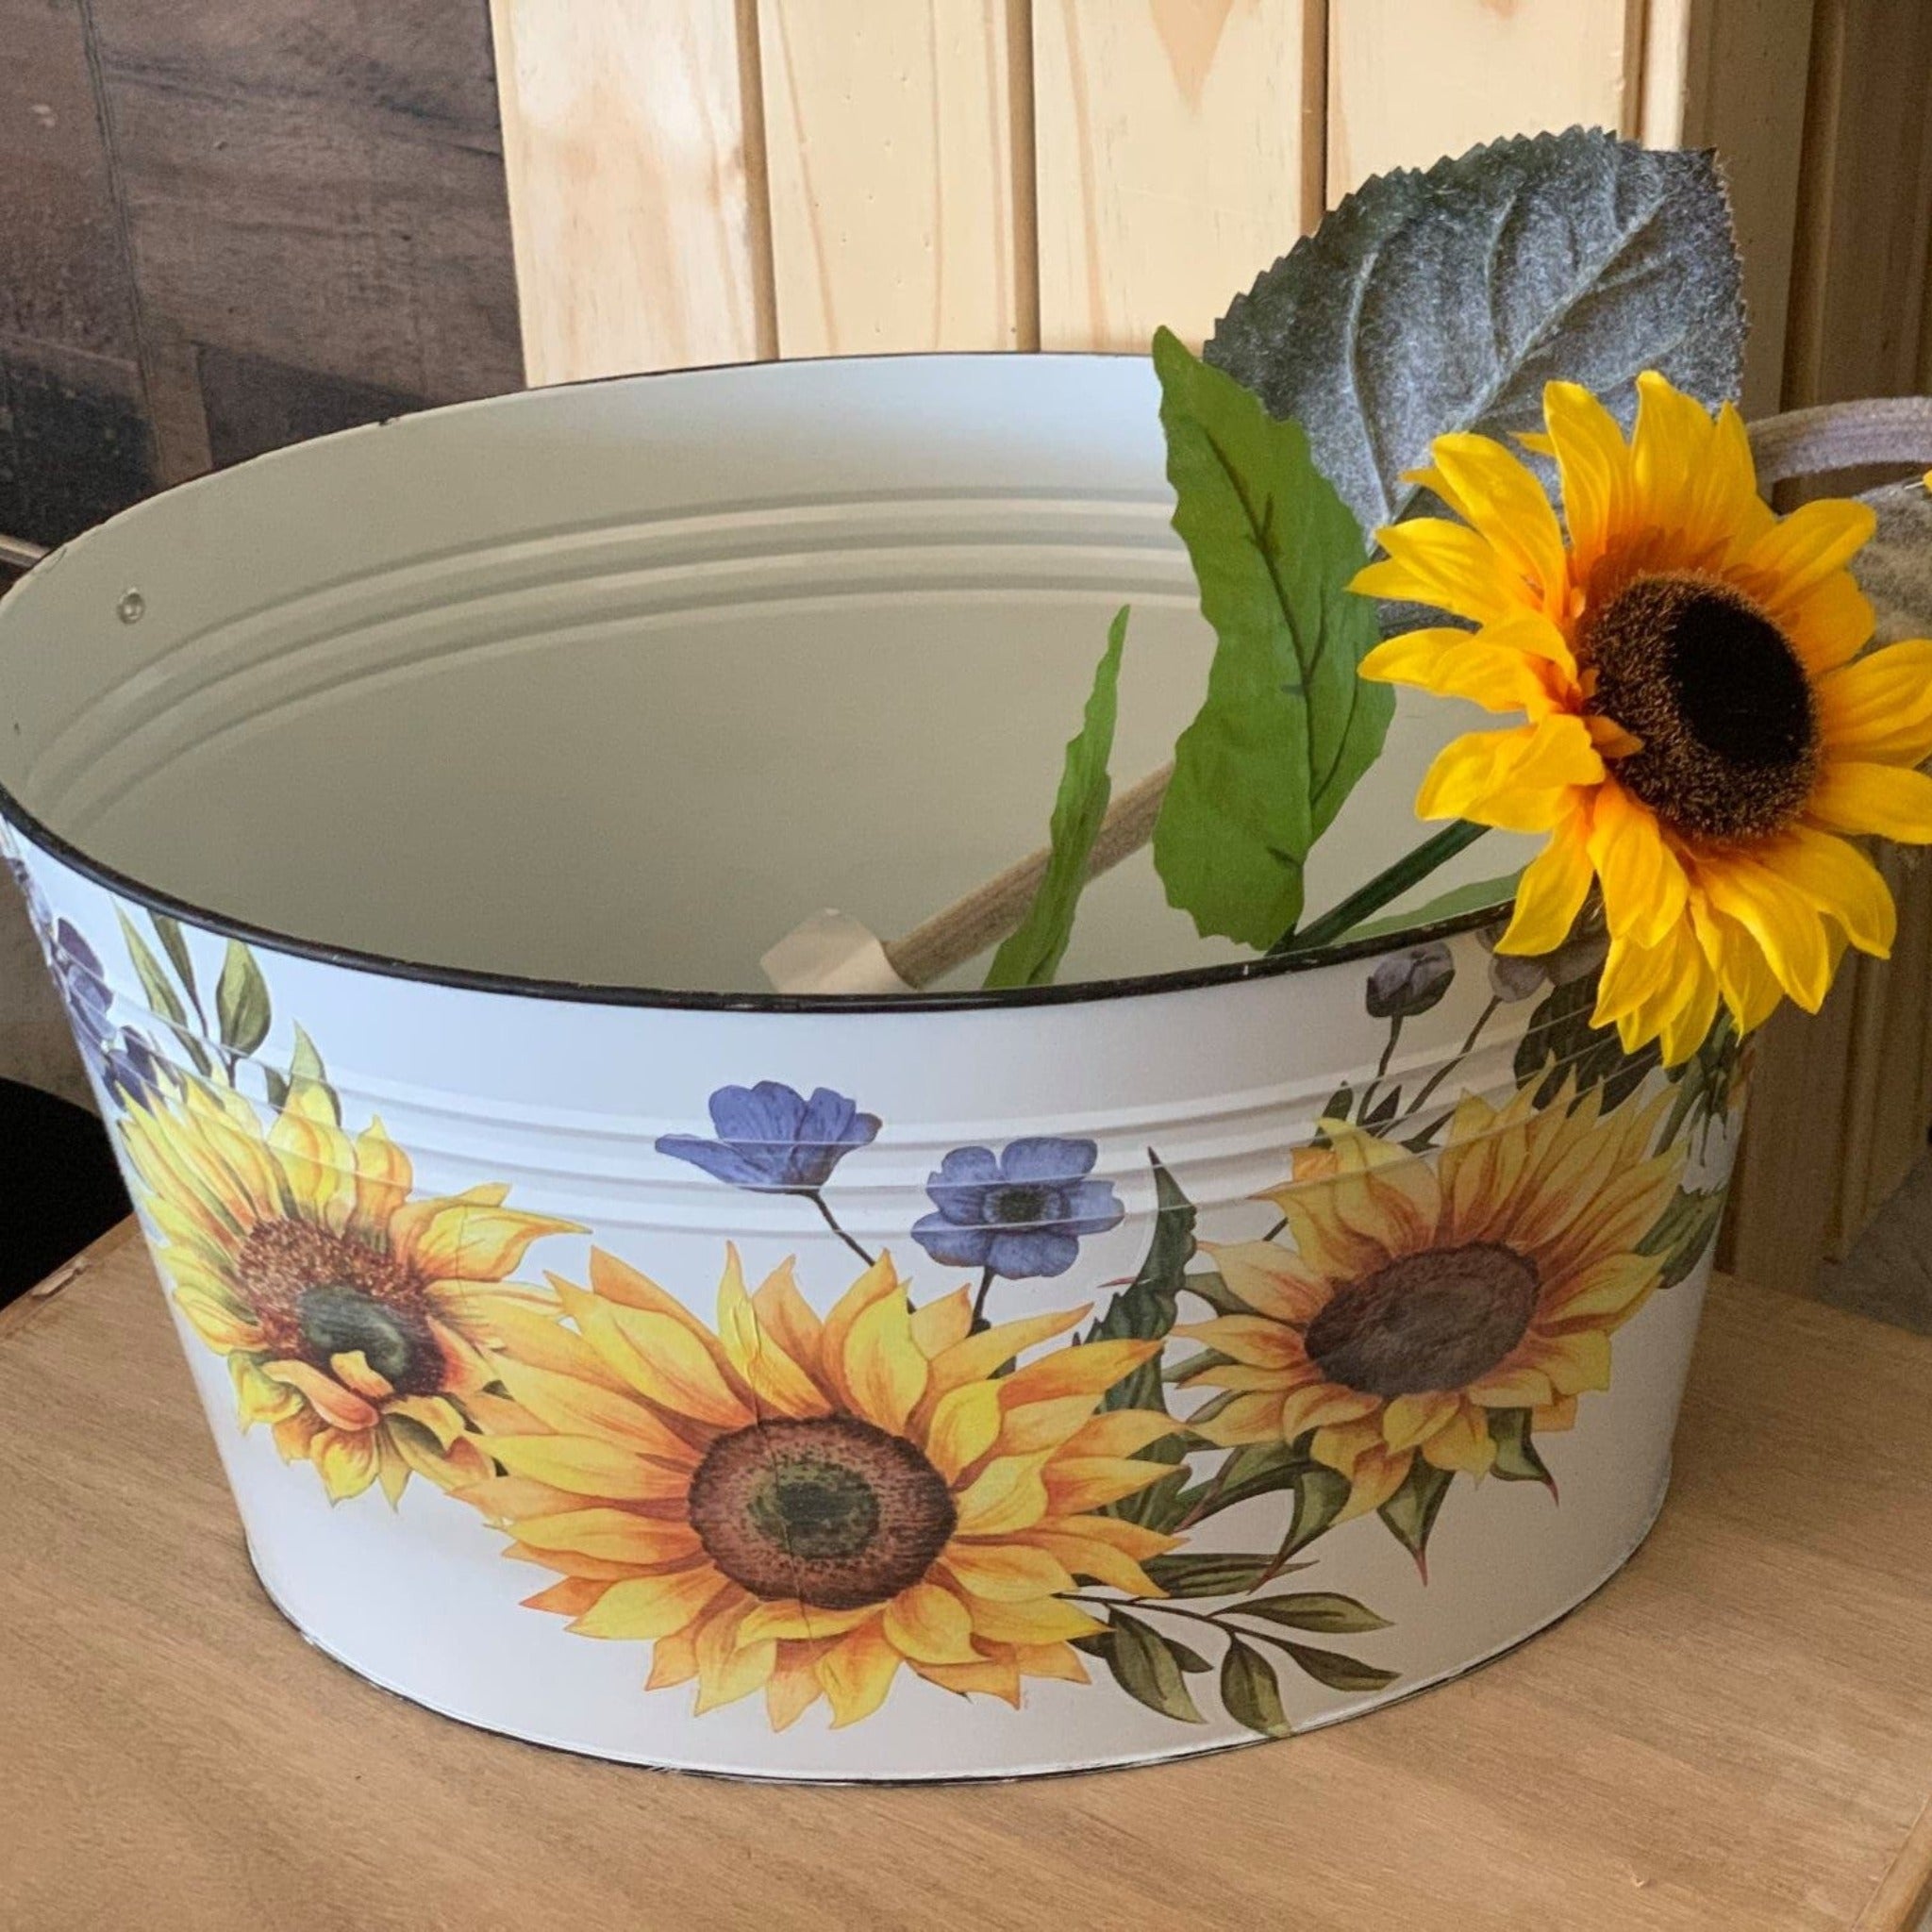 A white metal wash basin features ReDesign with Prima's Sunflower Fields transfer on it.